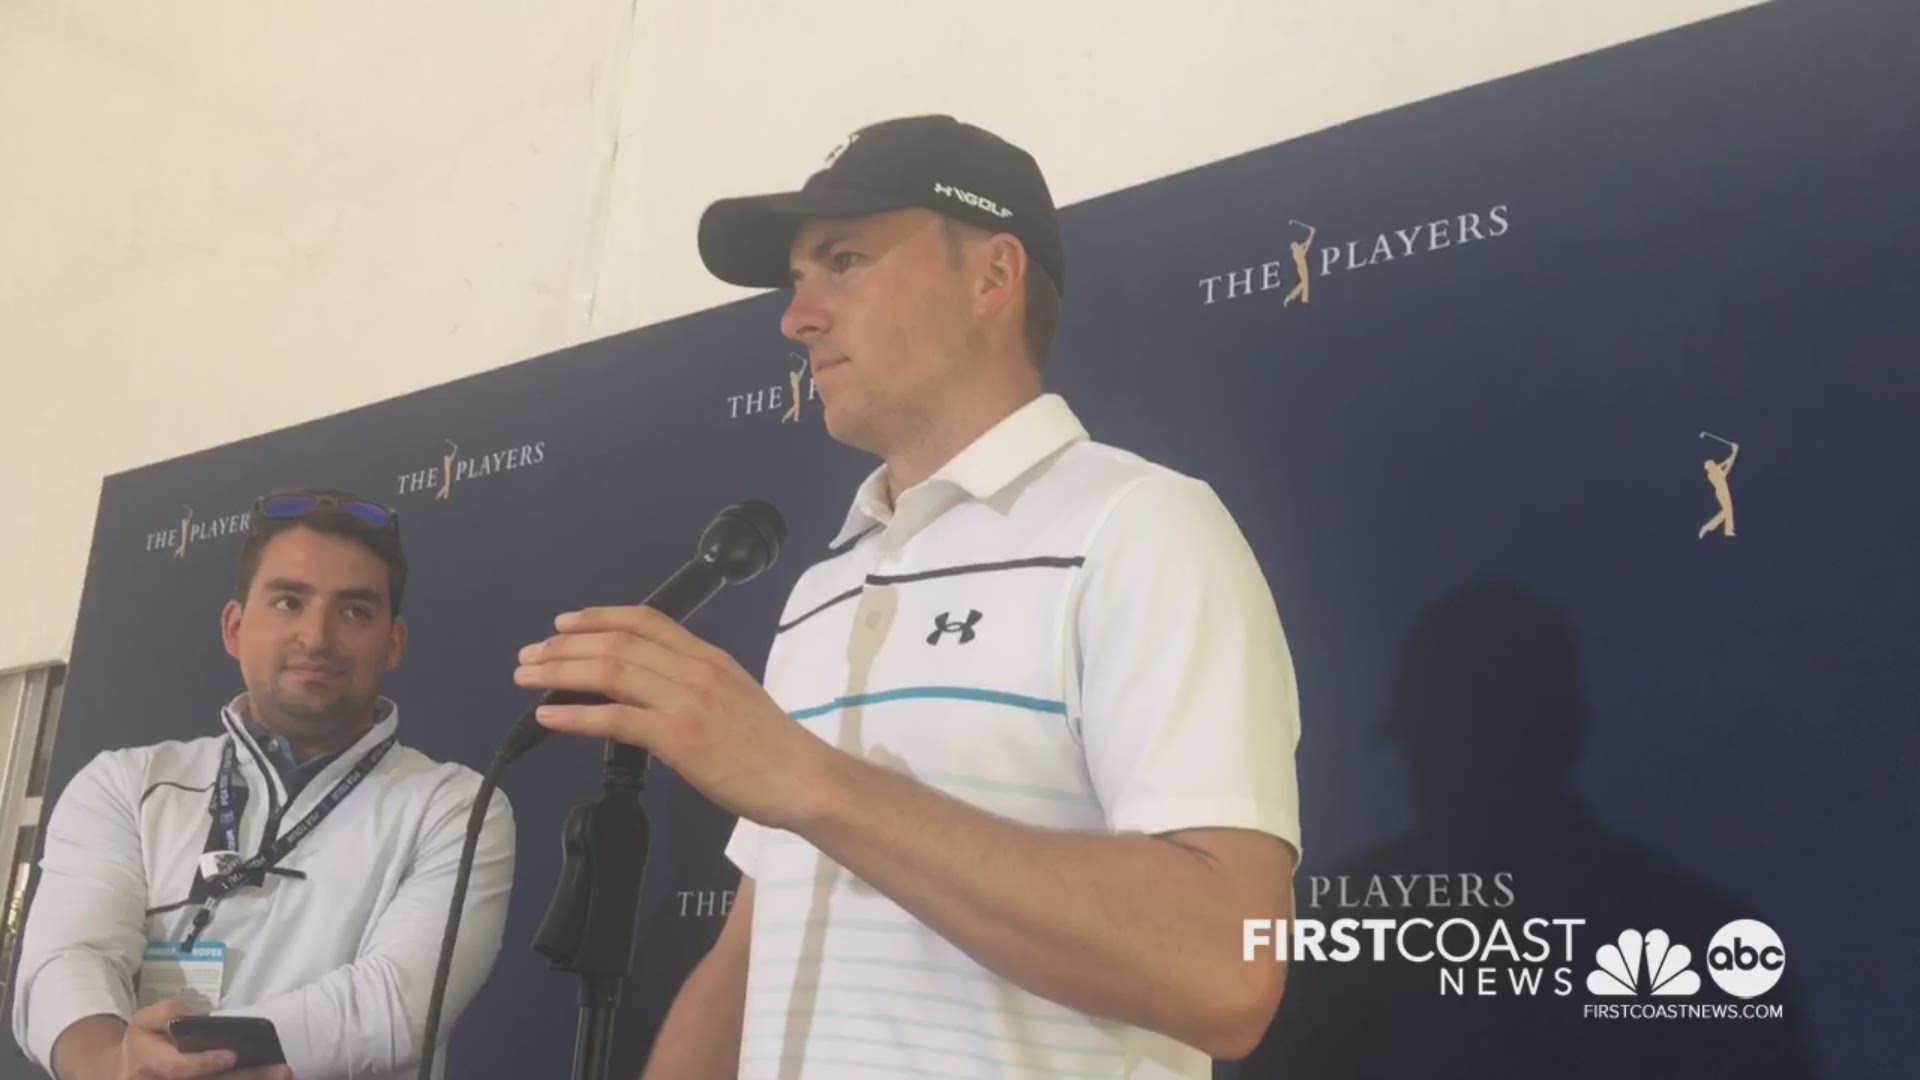 Fans have been barred from TPC at Sawgrass for the final three days The Players Championship due to coronavirus concerns. Jordan Spieth talked about it Thursday.